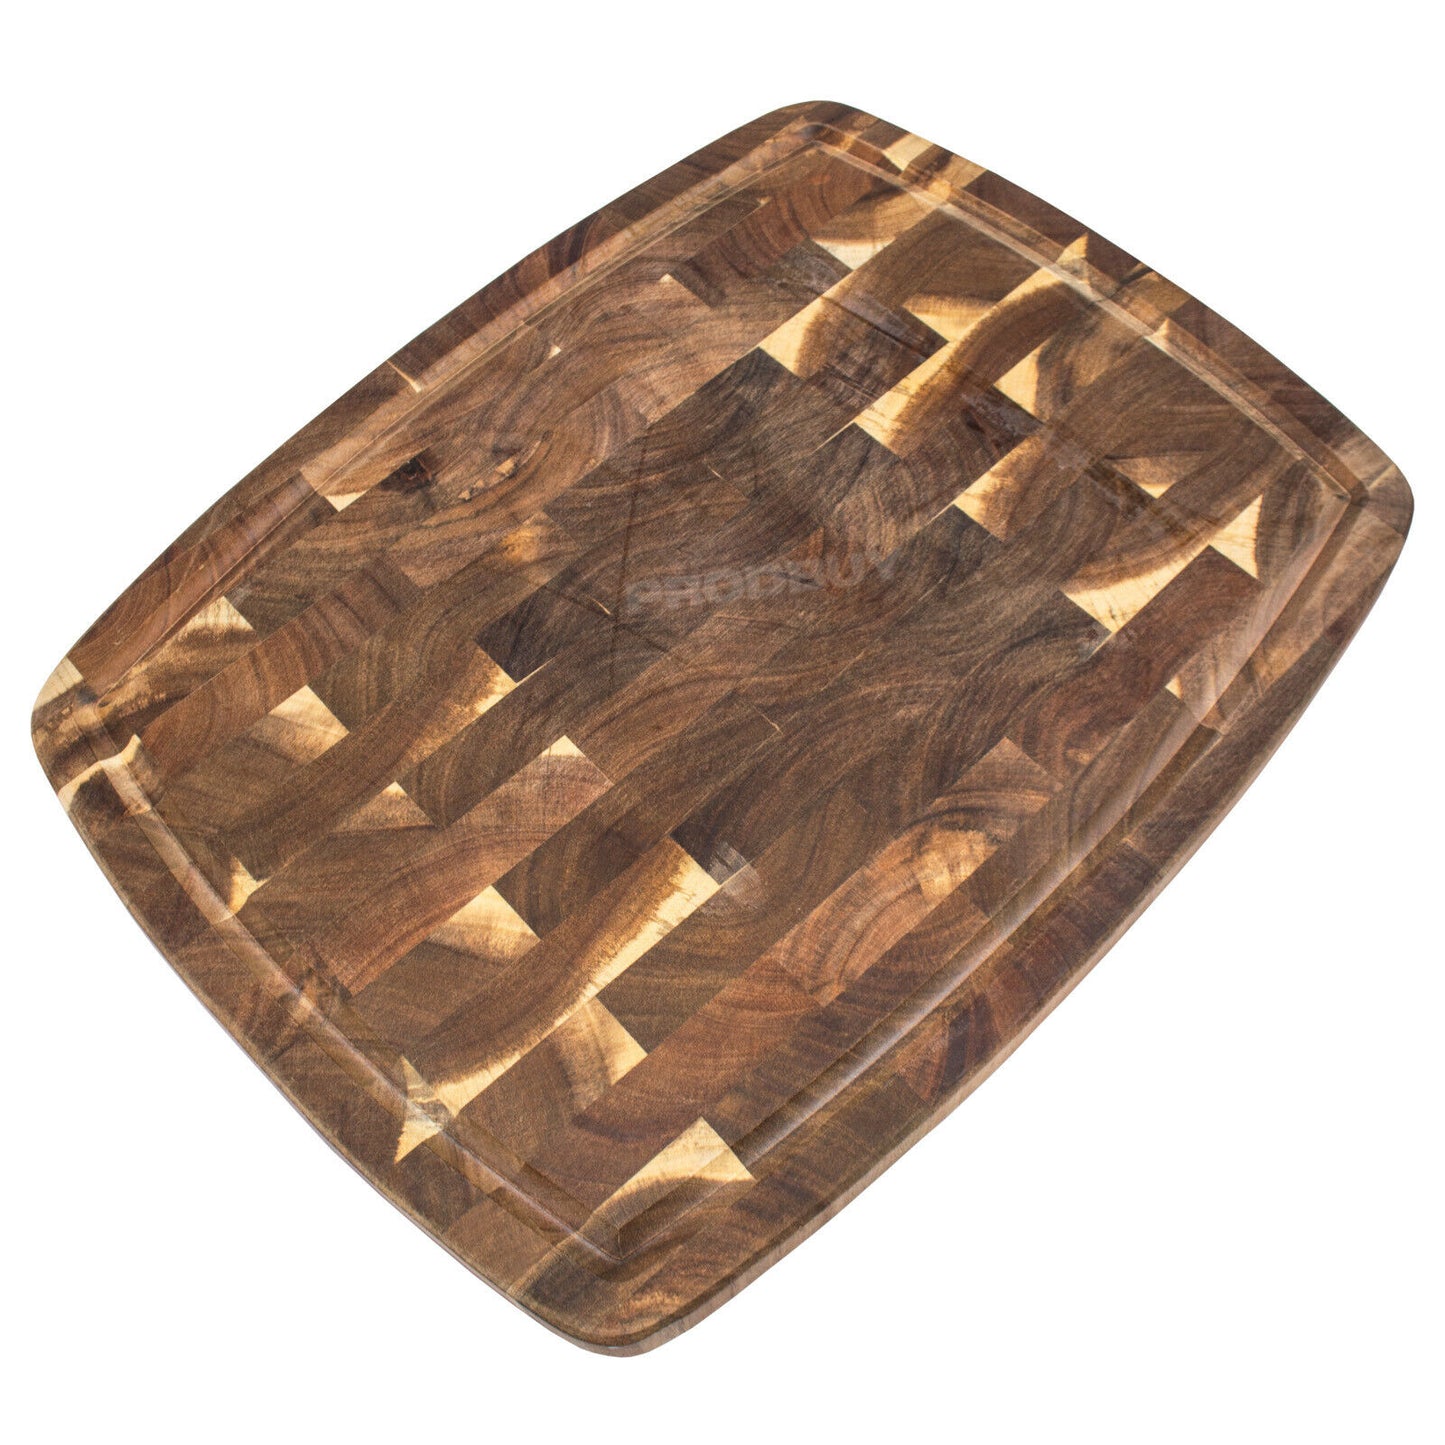 46cm Large Thick Heavy End Grain Acacia Wooden Chopping Board Butchers Block